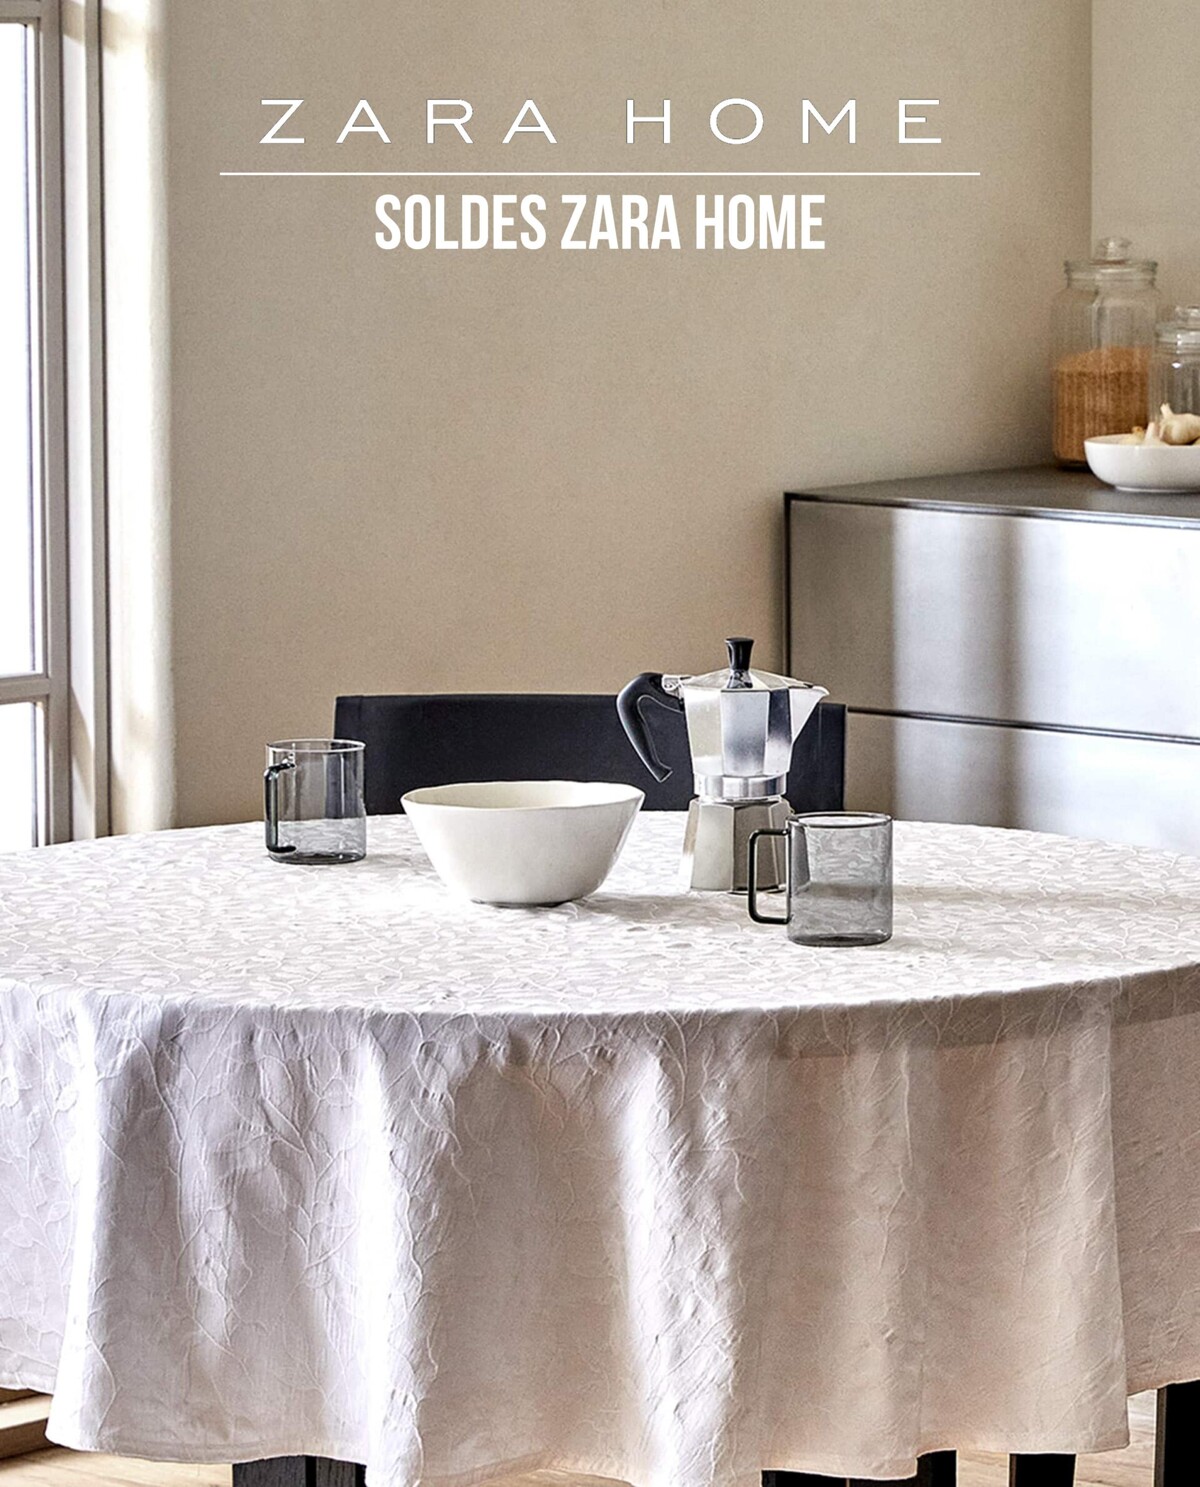 Catalogue Soldes Zara Home, page 00001